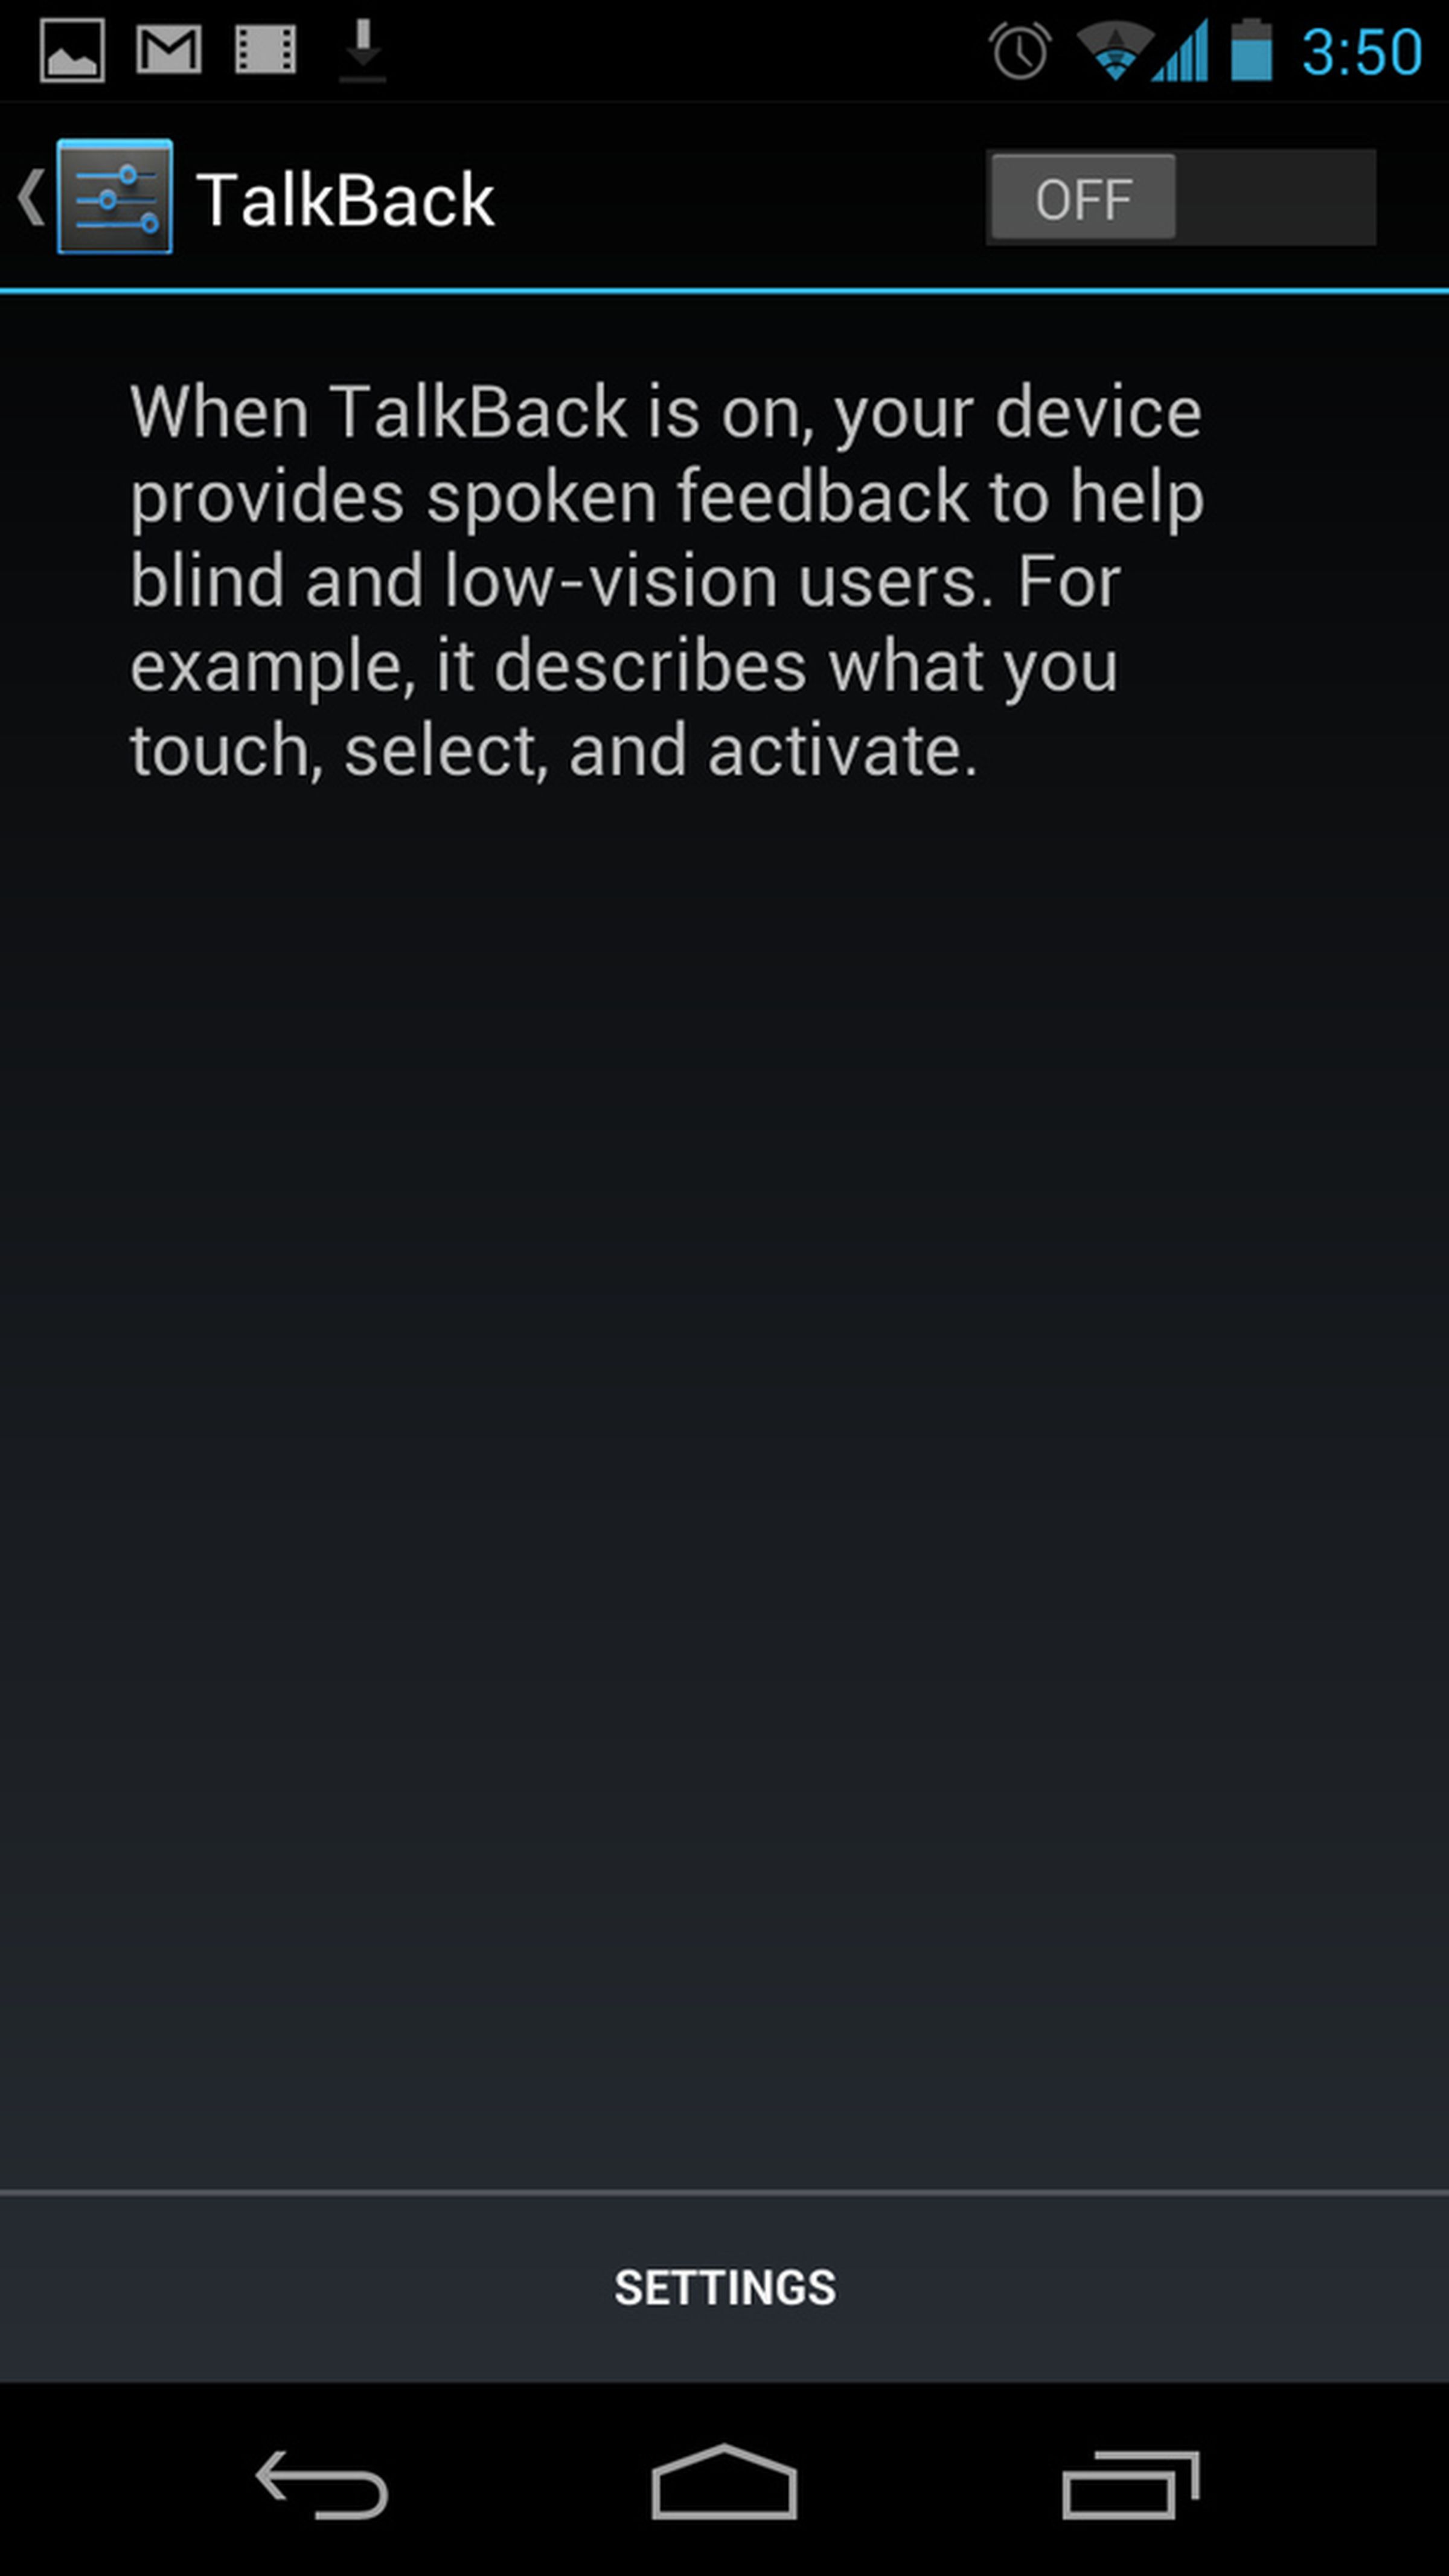 Android 4.1 Jelly Bean review screenshots